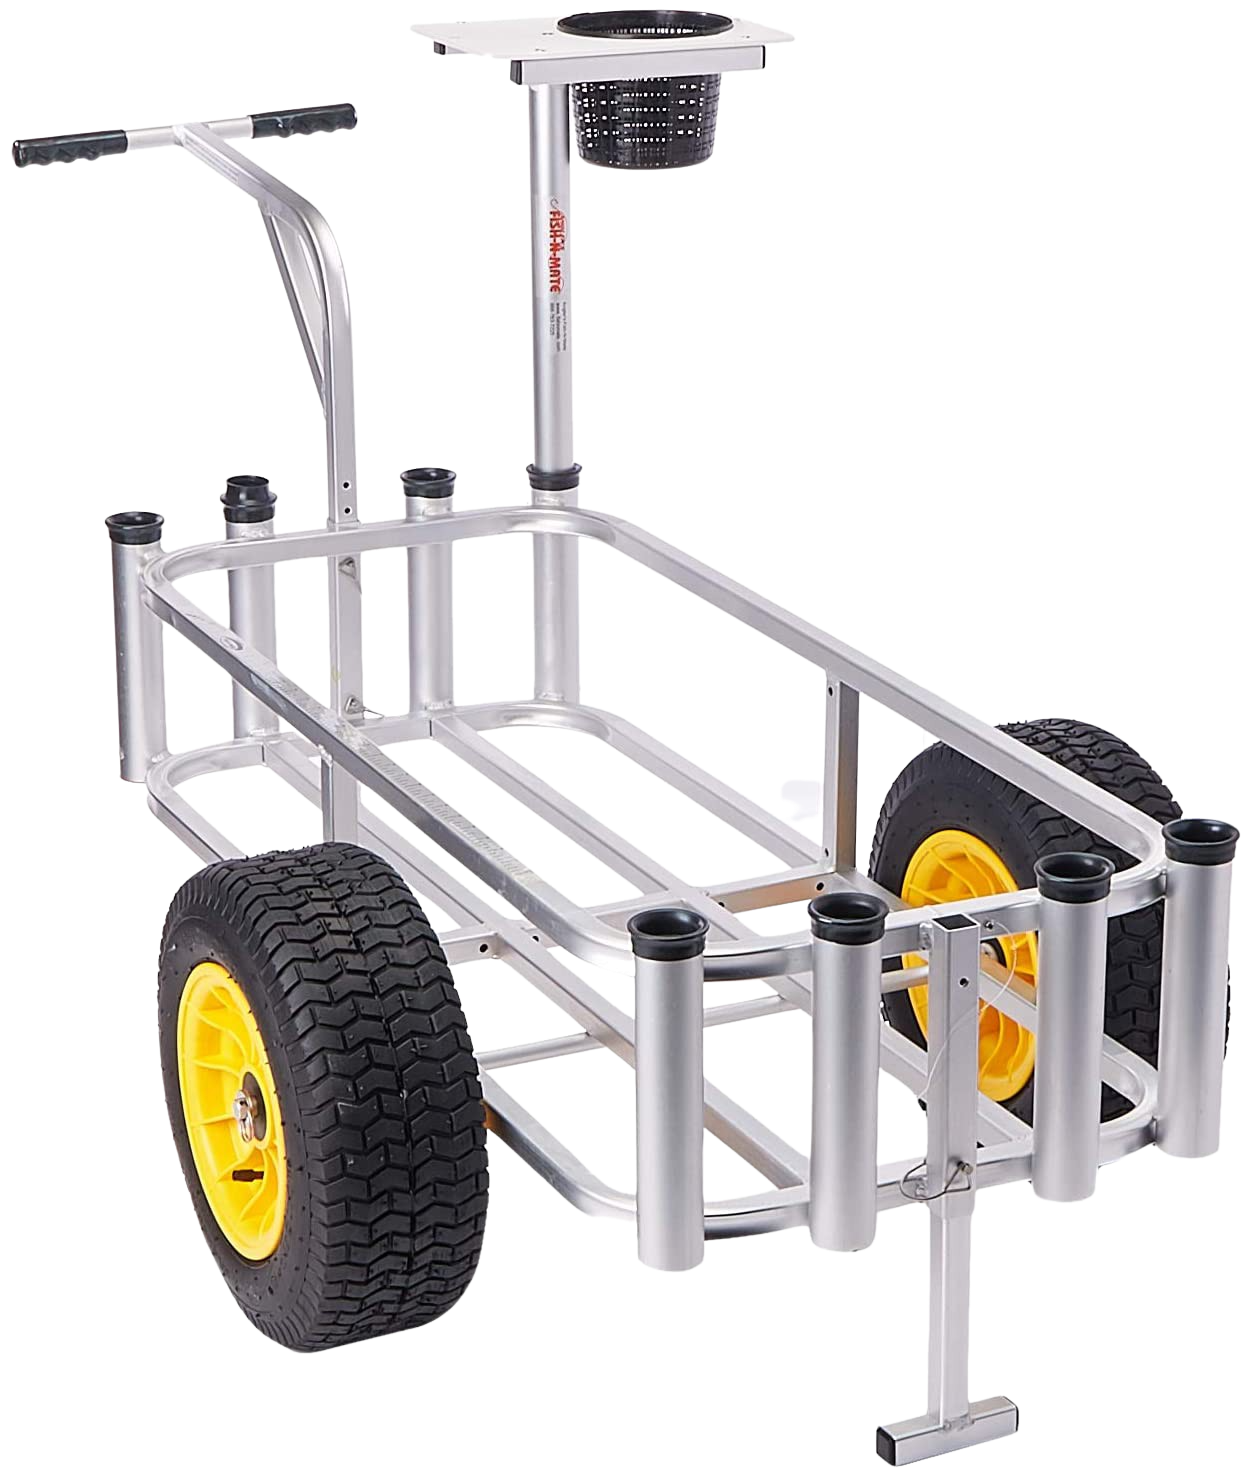 Fish-N-Mate Pier Cart with Cutting Board and Bait Basket